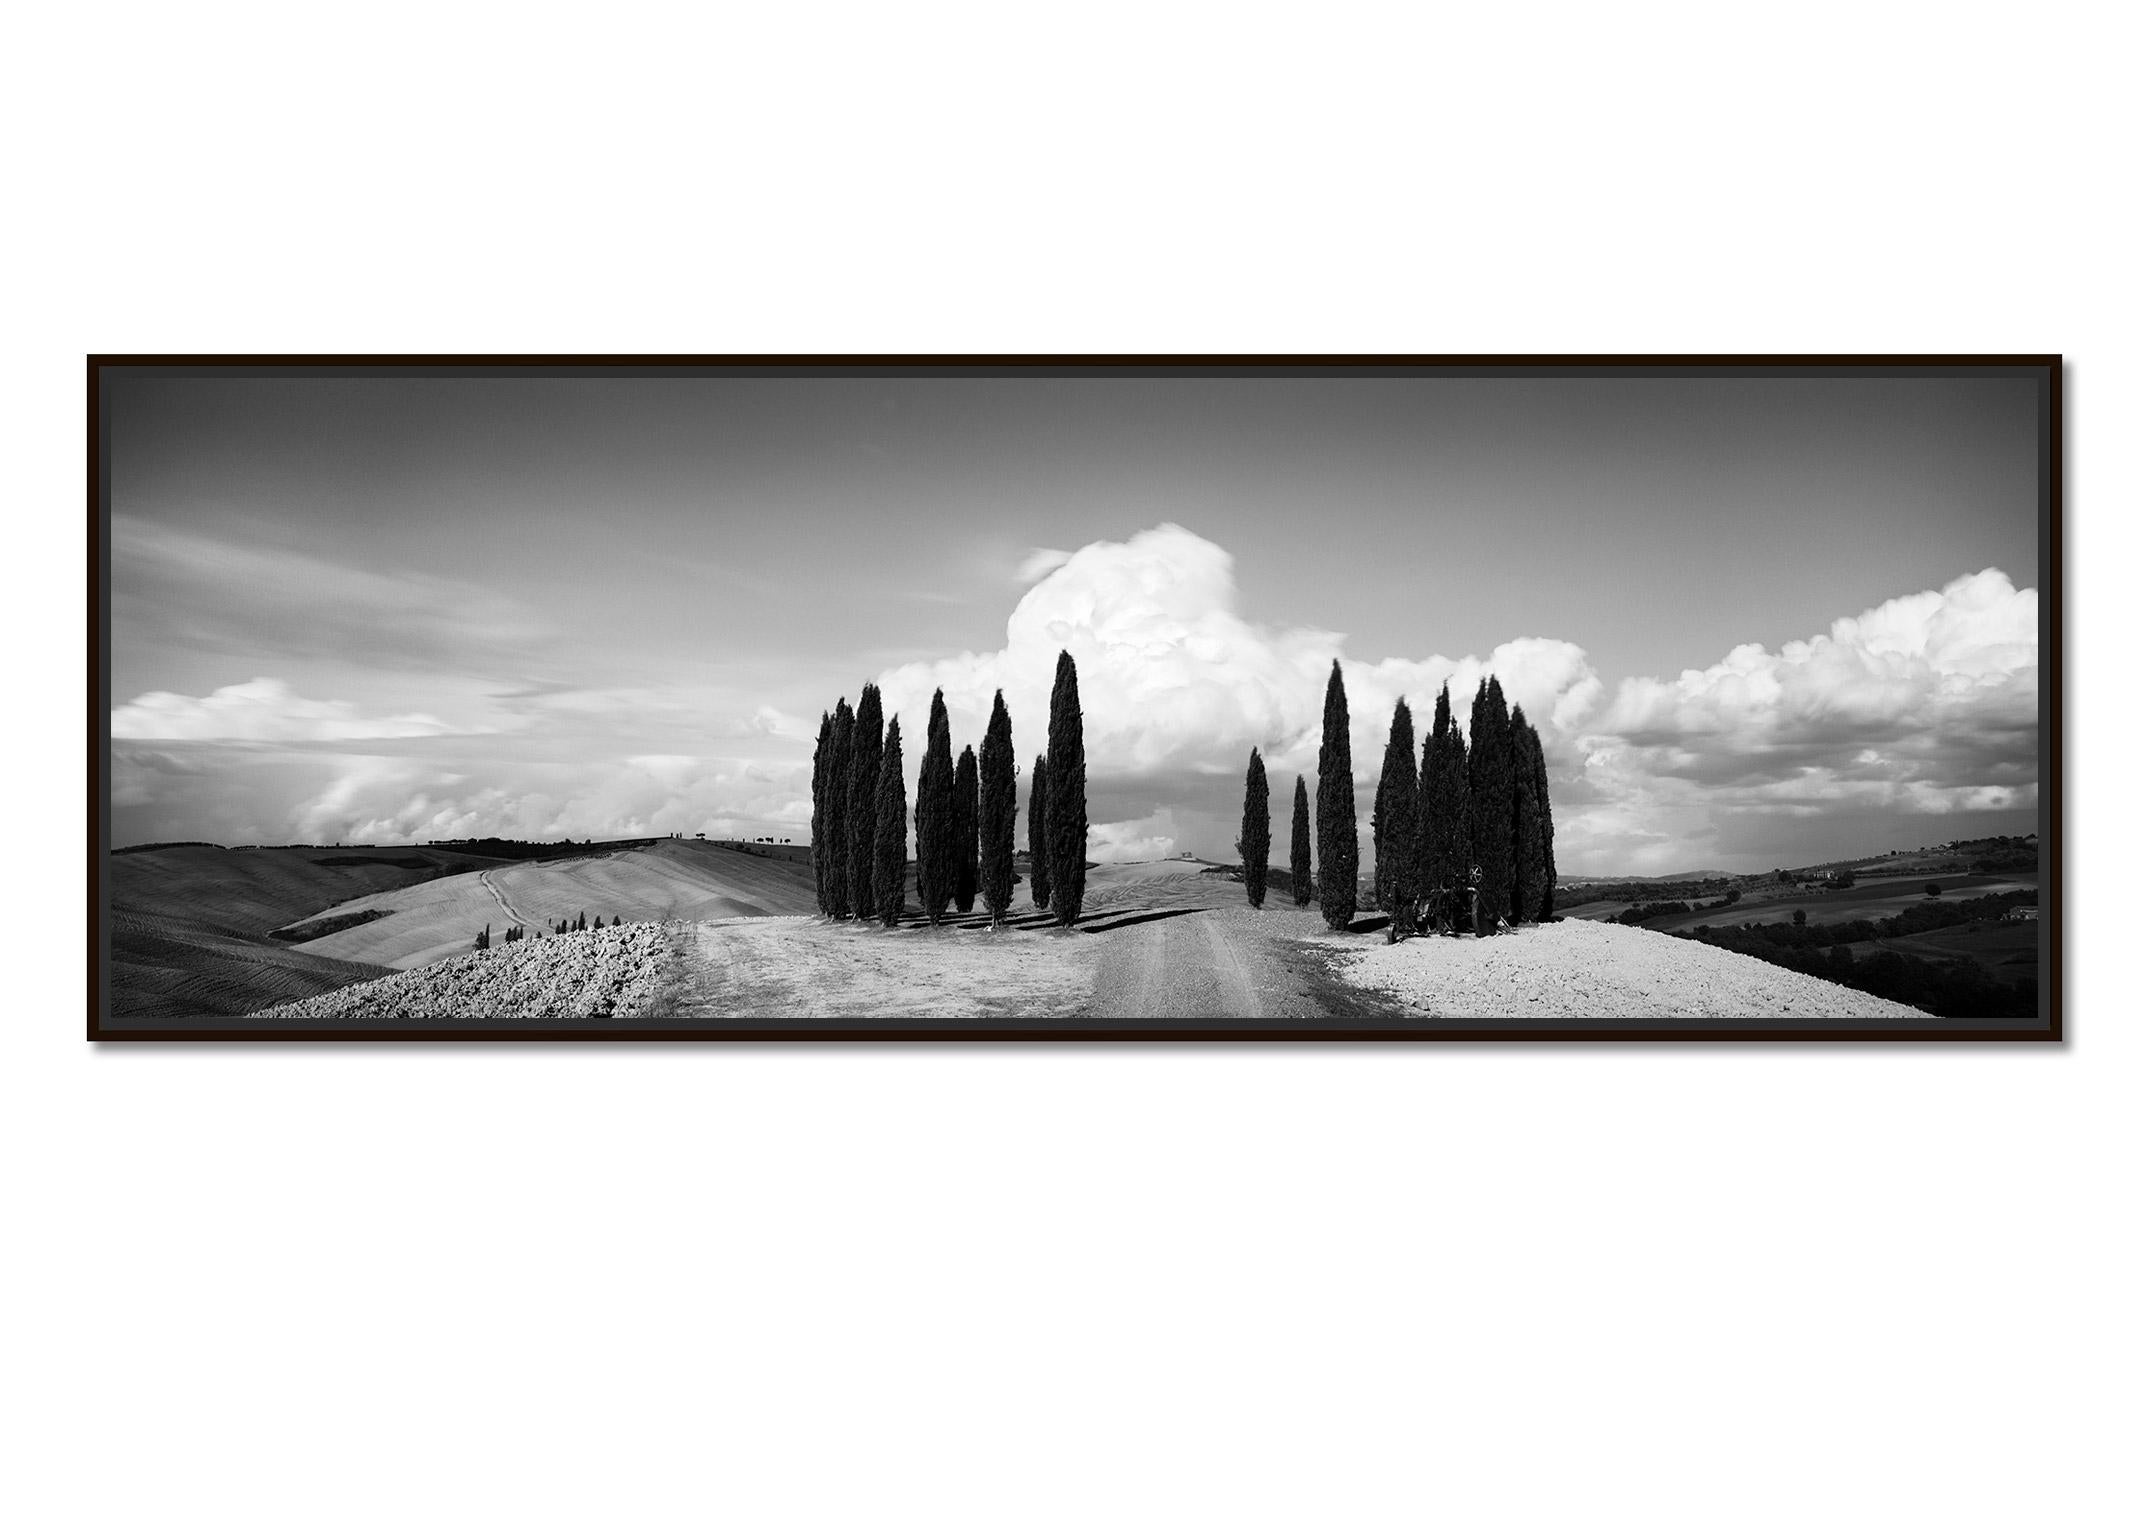 Circle of Cypress Trees, Tuscany, black and white art photography, landscape - Photograph by Gerald Berghammer